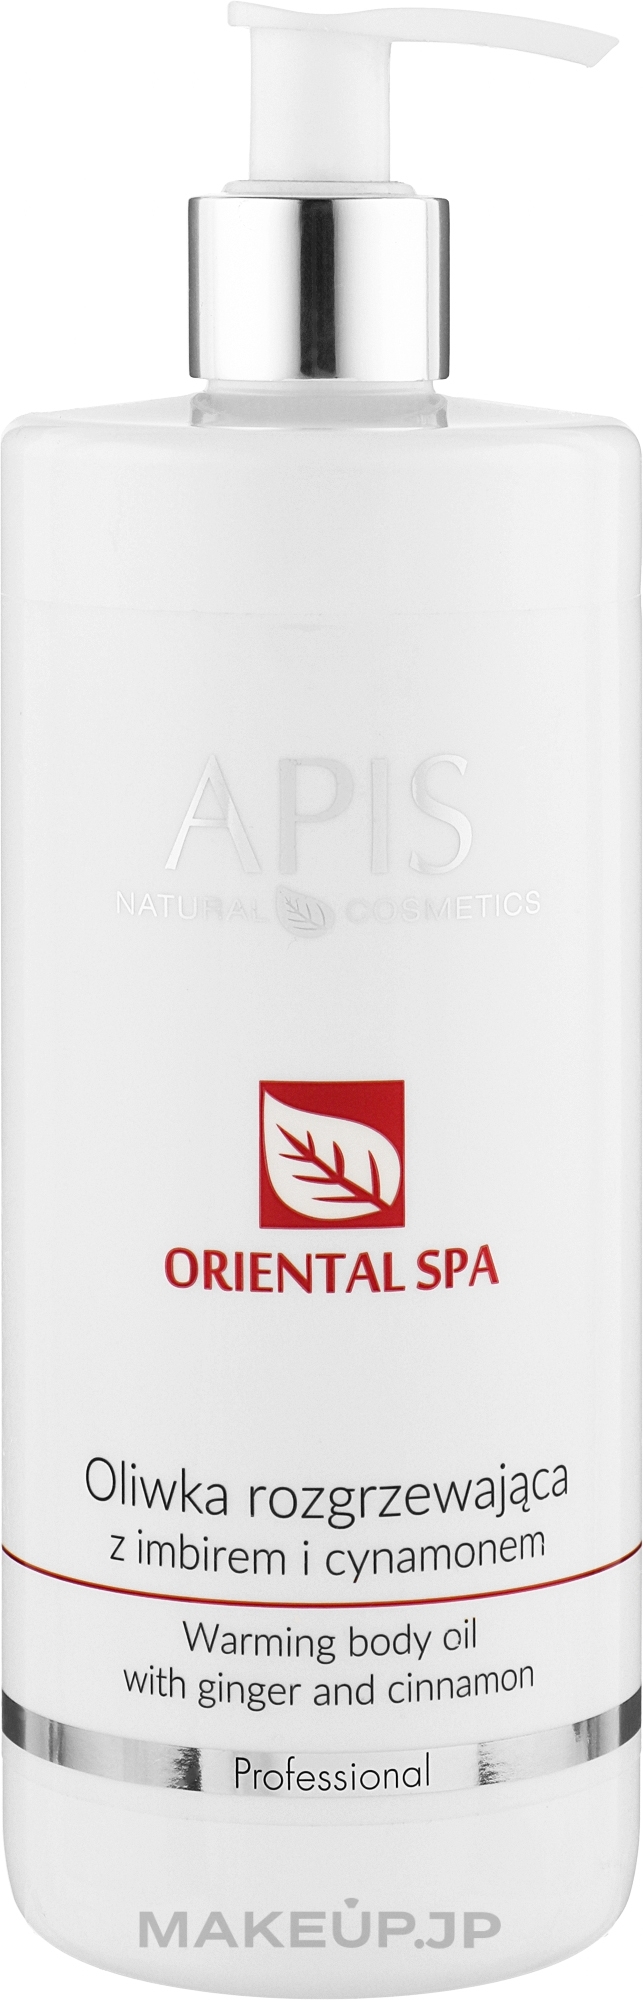 Warming Olive Oil - APIS Professional Oriental Spa Warming Olive Oil With Ginger And Cinamon — photo 500 ml